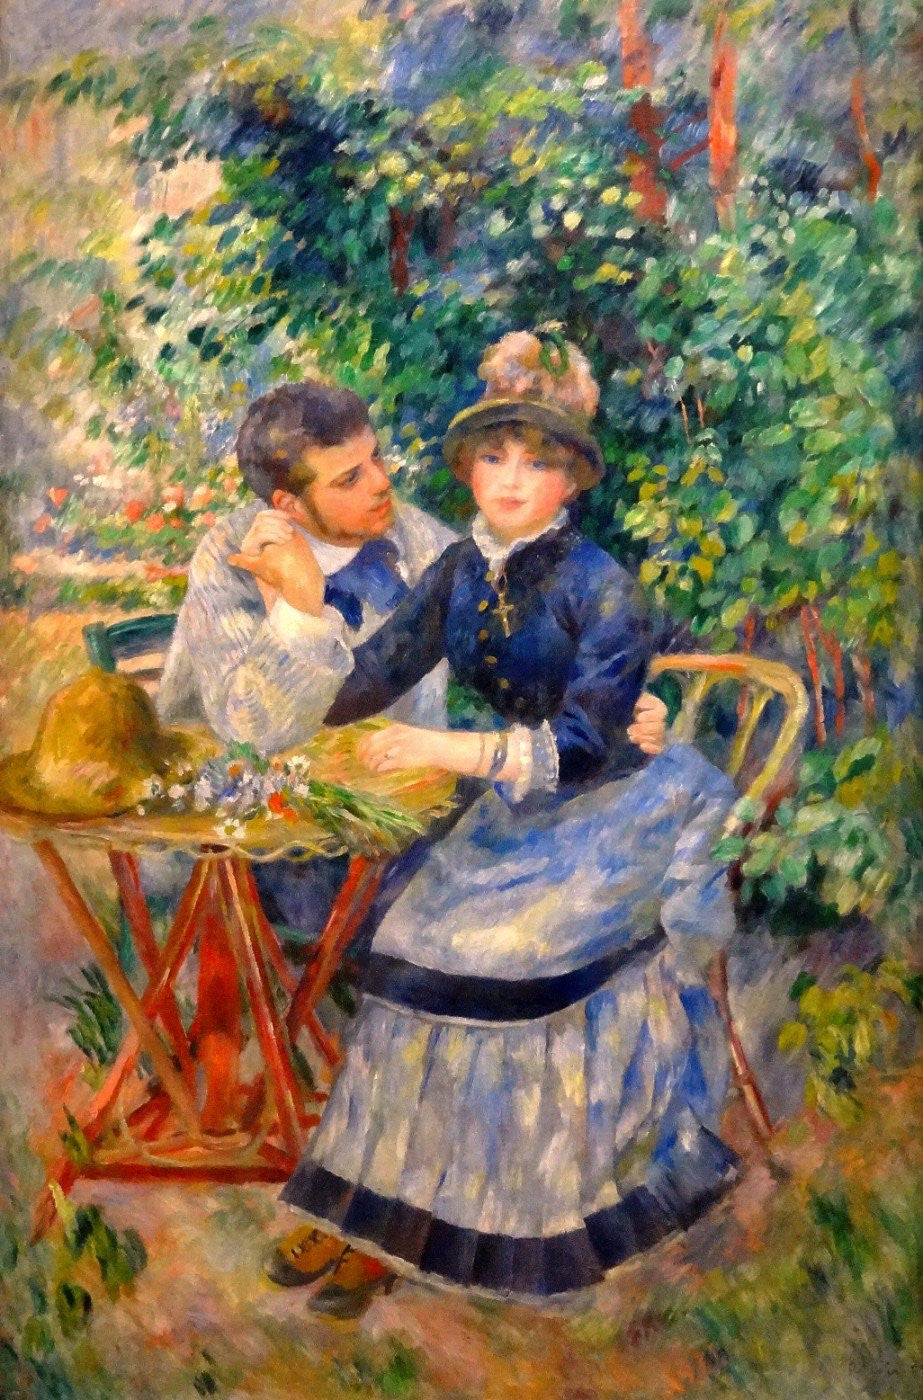 Canvas　Art　Canvas　Posters,　Variants　Frames,　Garden　Pierre-Auguste　Large　Small,　Medium　Prints　and　In　Digital　Renoir　Buy　the　Compact,　by　Prints